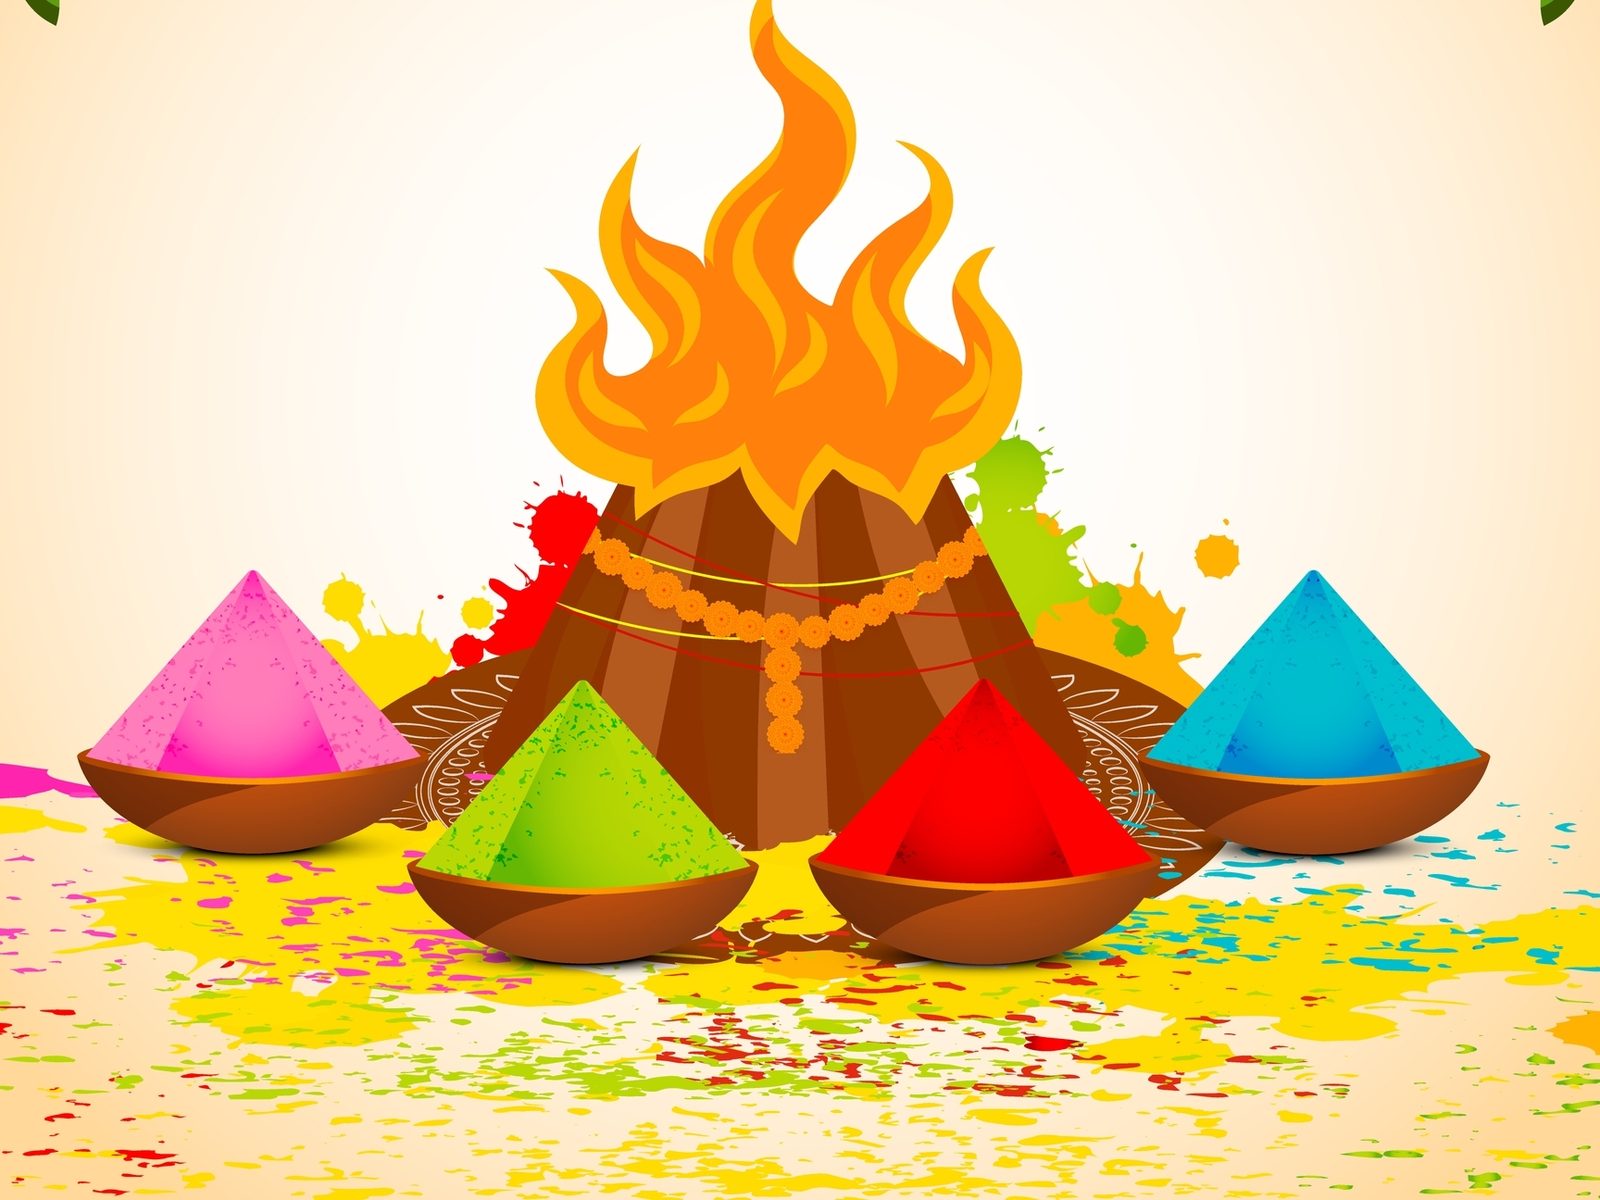 Hand Draw Sketch Happy Holi Indian Spring Festival Of Colors Card Design  Stock Illustration - Download Image Now - iStock